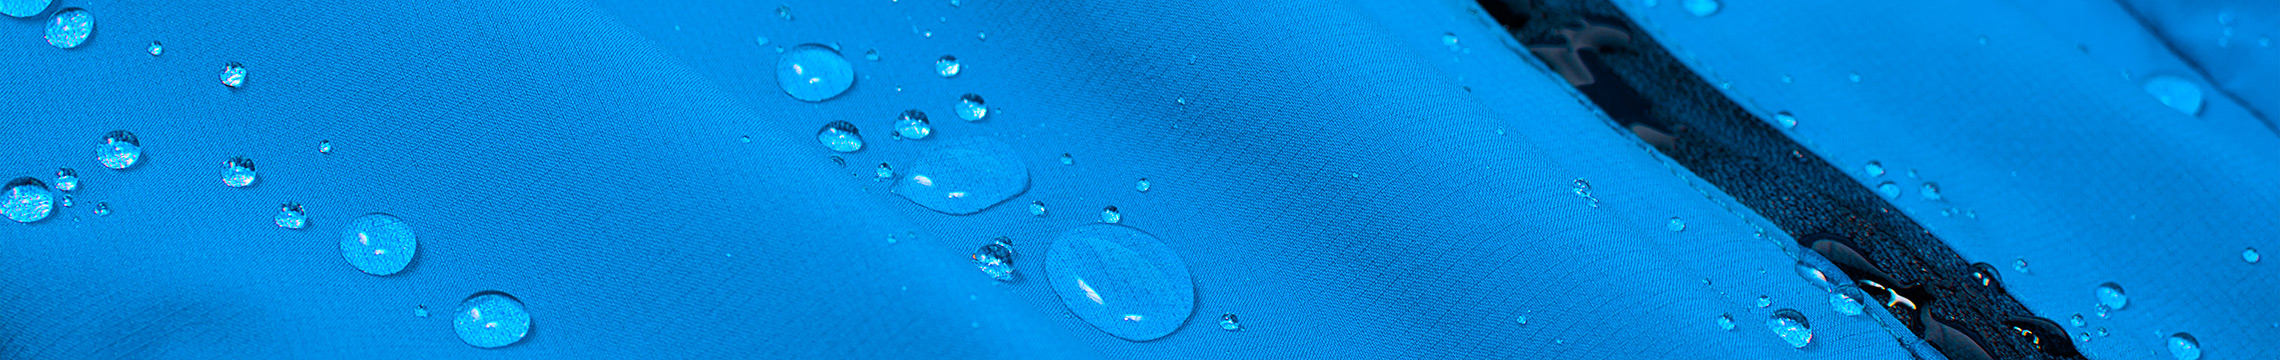 Close up on blue rain coat with beads of water running down